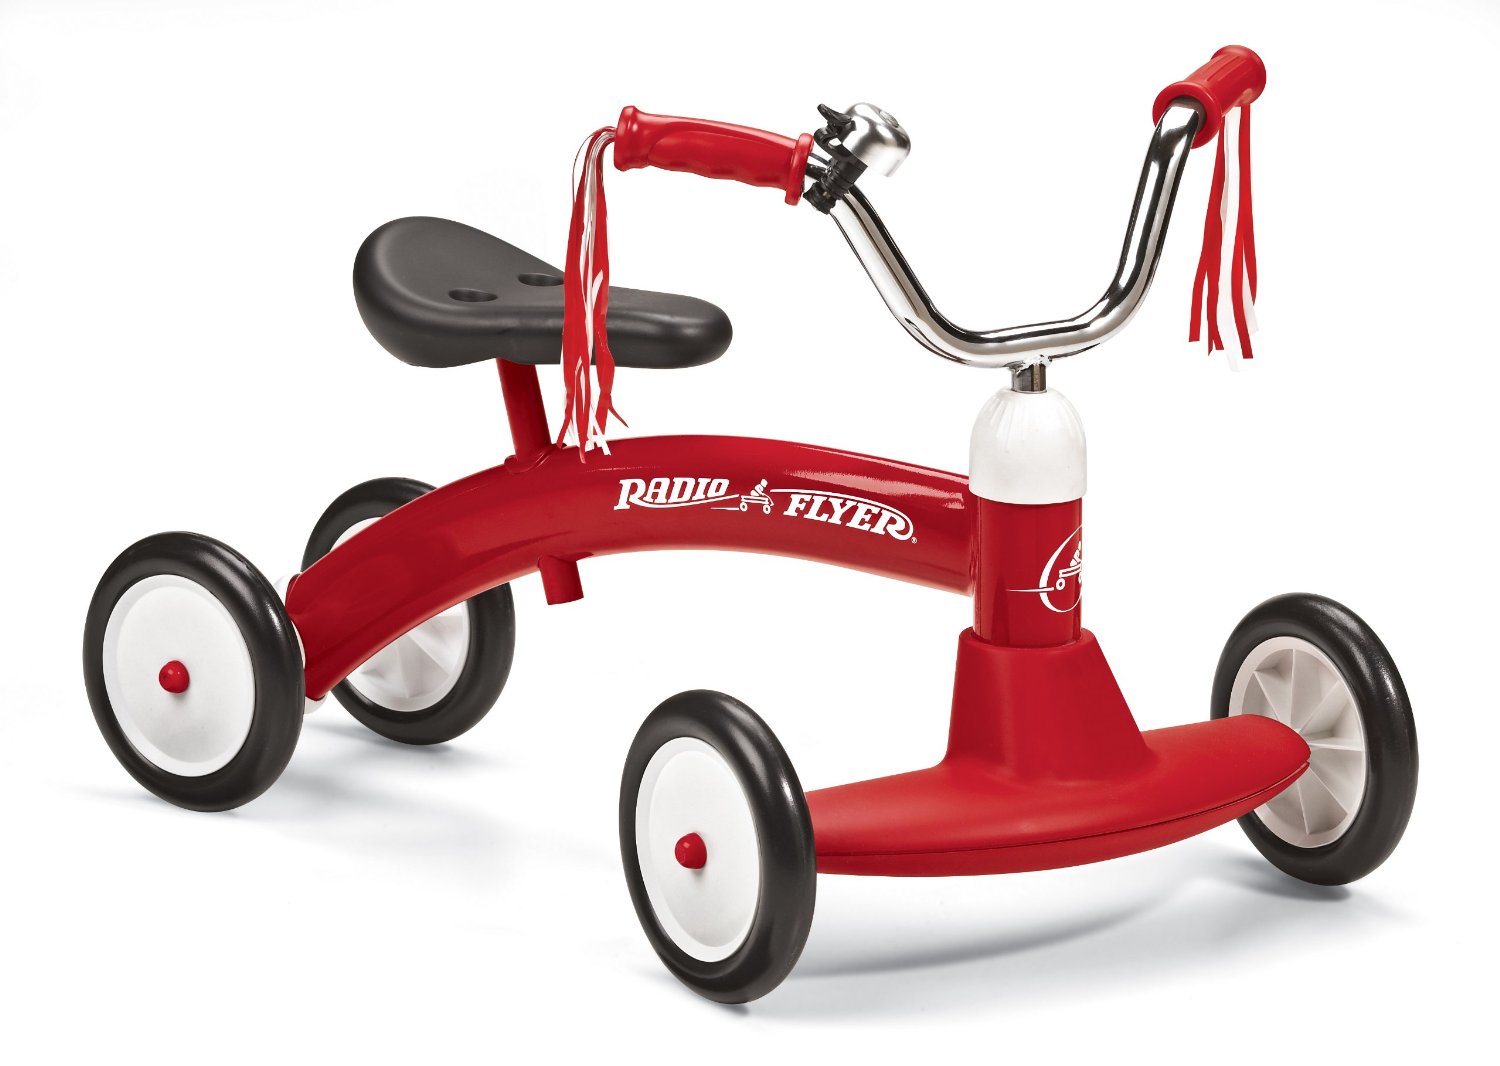 Radio Flyer 20 Scoot-About Tricycle Only $39.39 Shipped (Reg. $59.99)